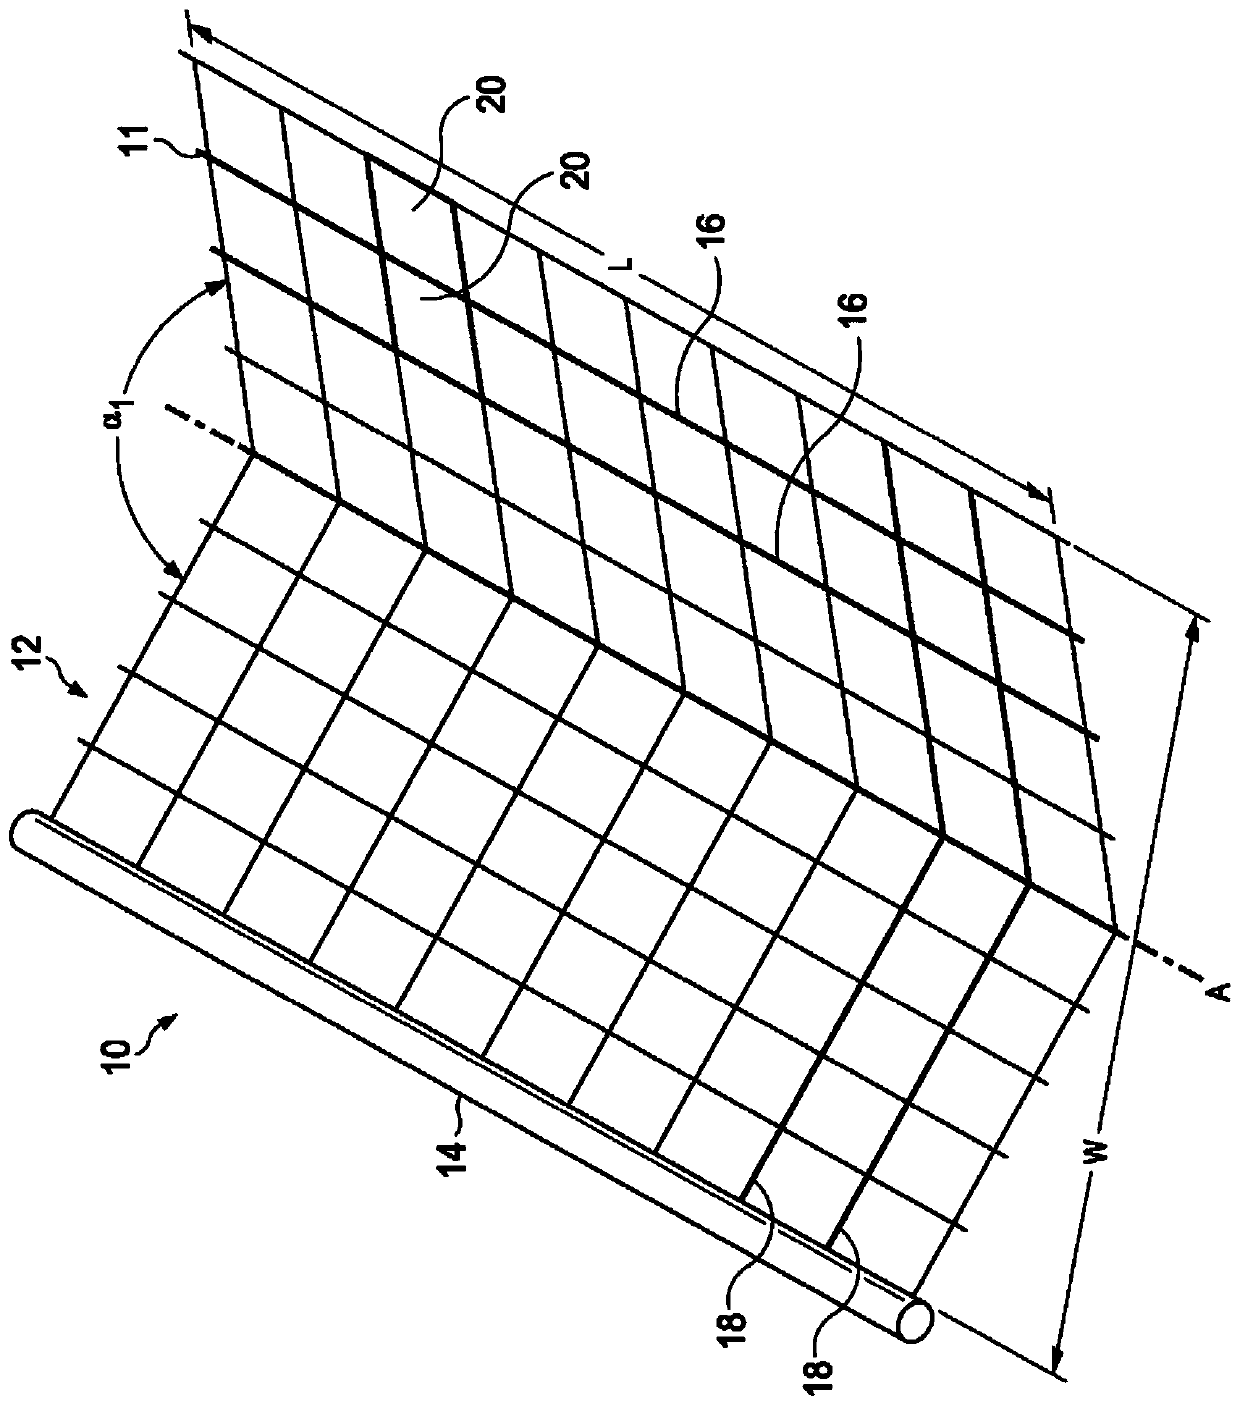 A method of fireproofing a component comprising a set of surfaces with a fireproofing material